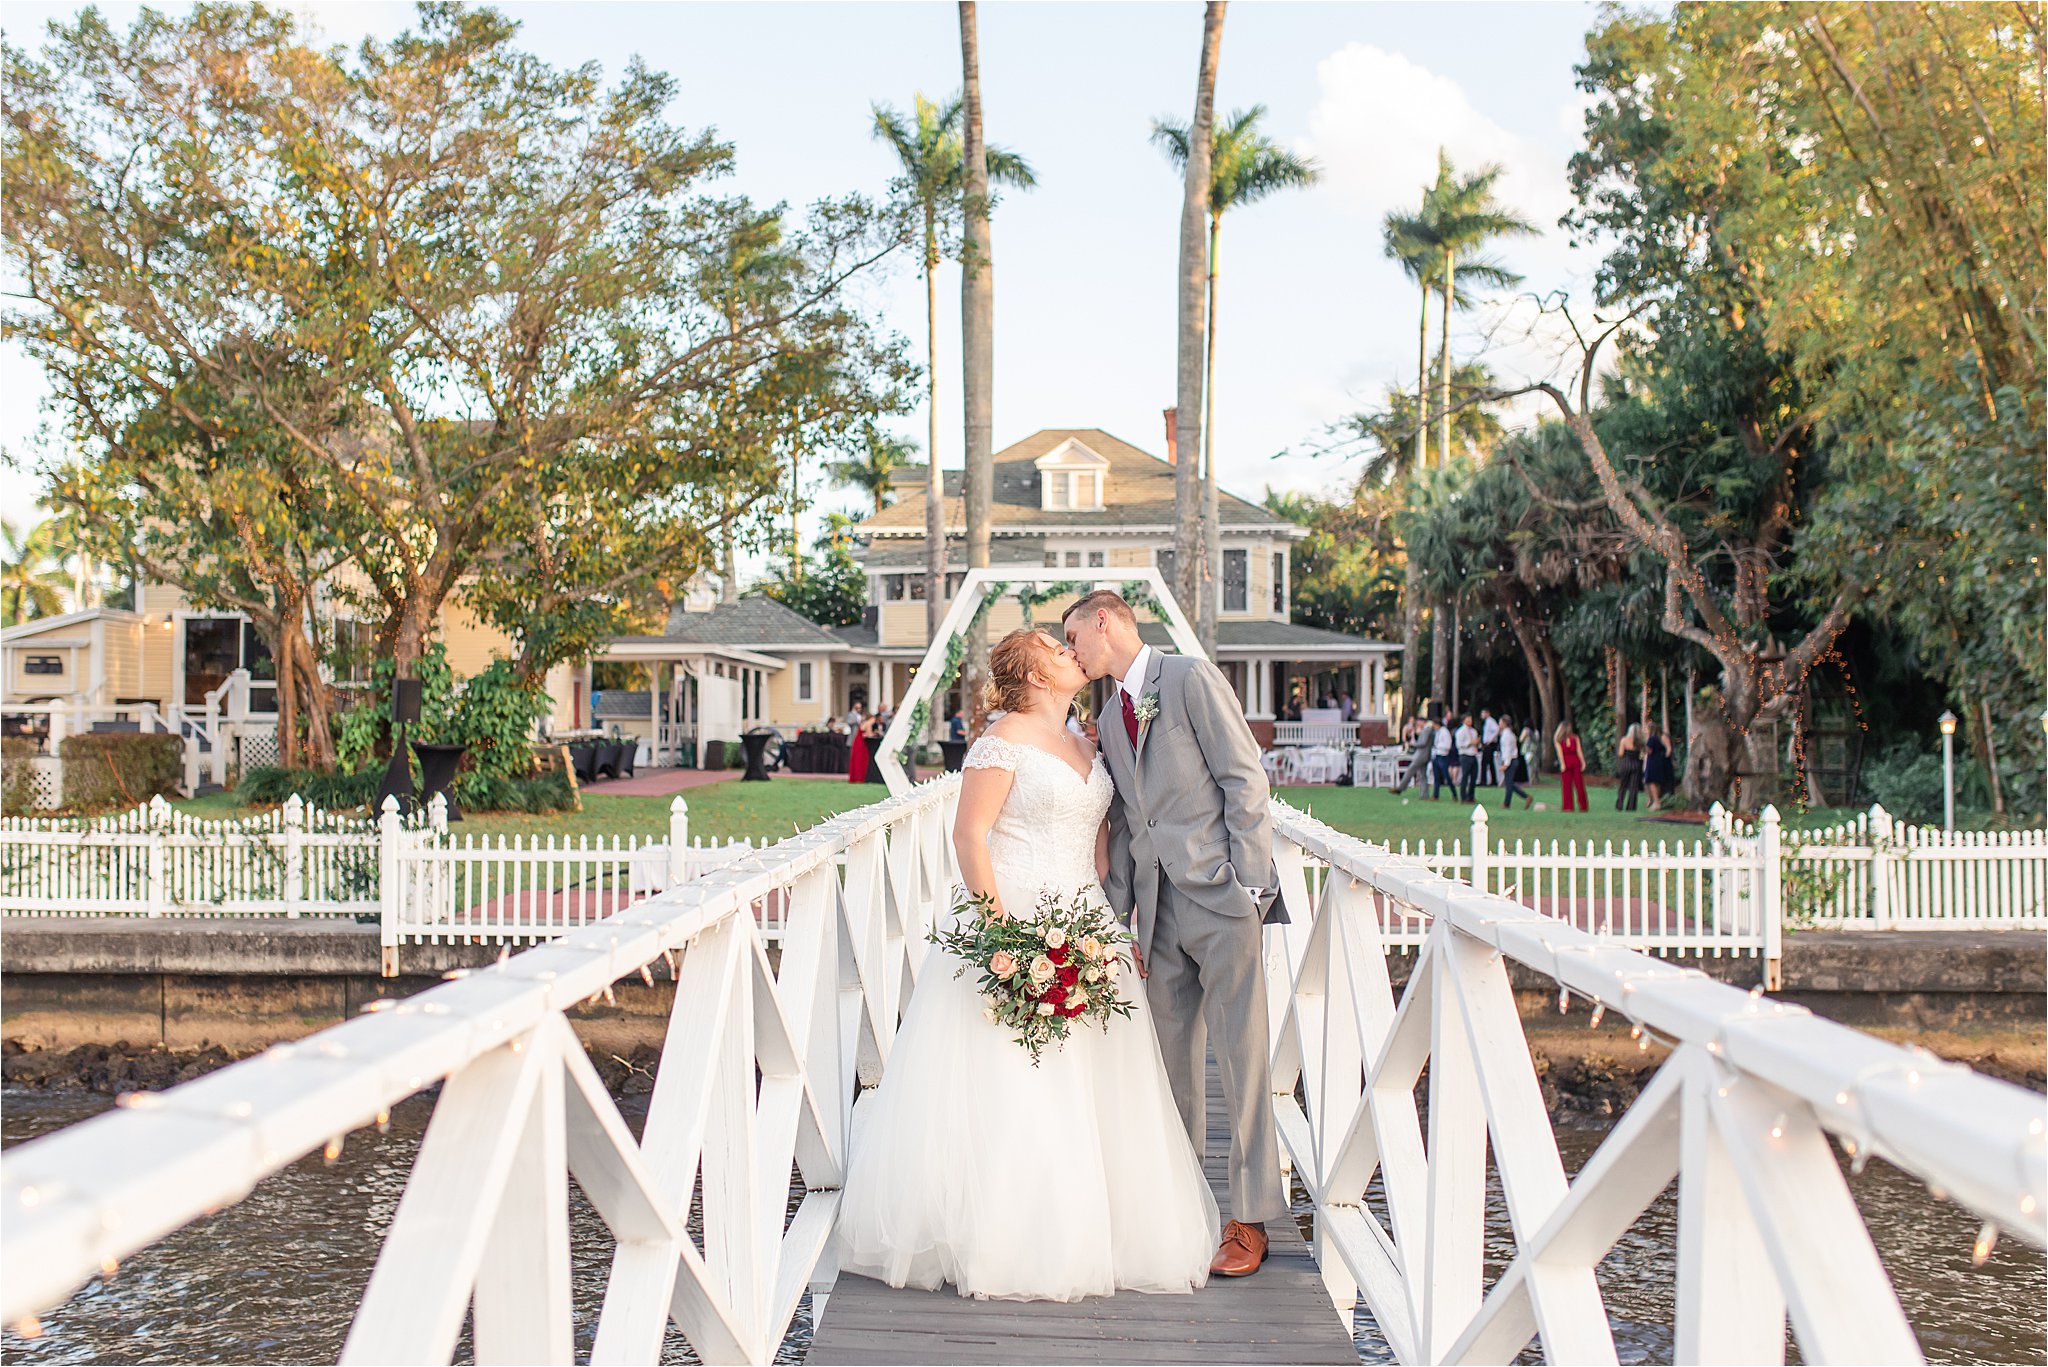 Bride and groom at spring wedding outside at Heitman House in downtown Ft Myers, Florida wedding venue